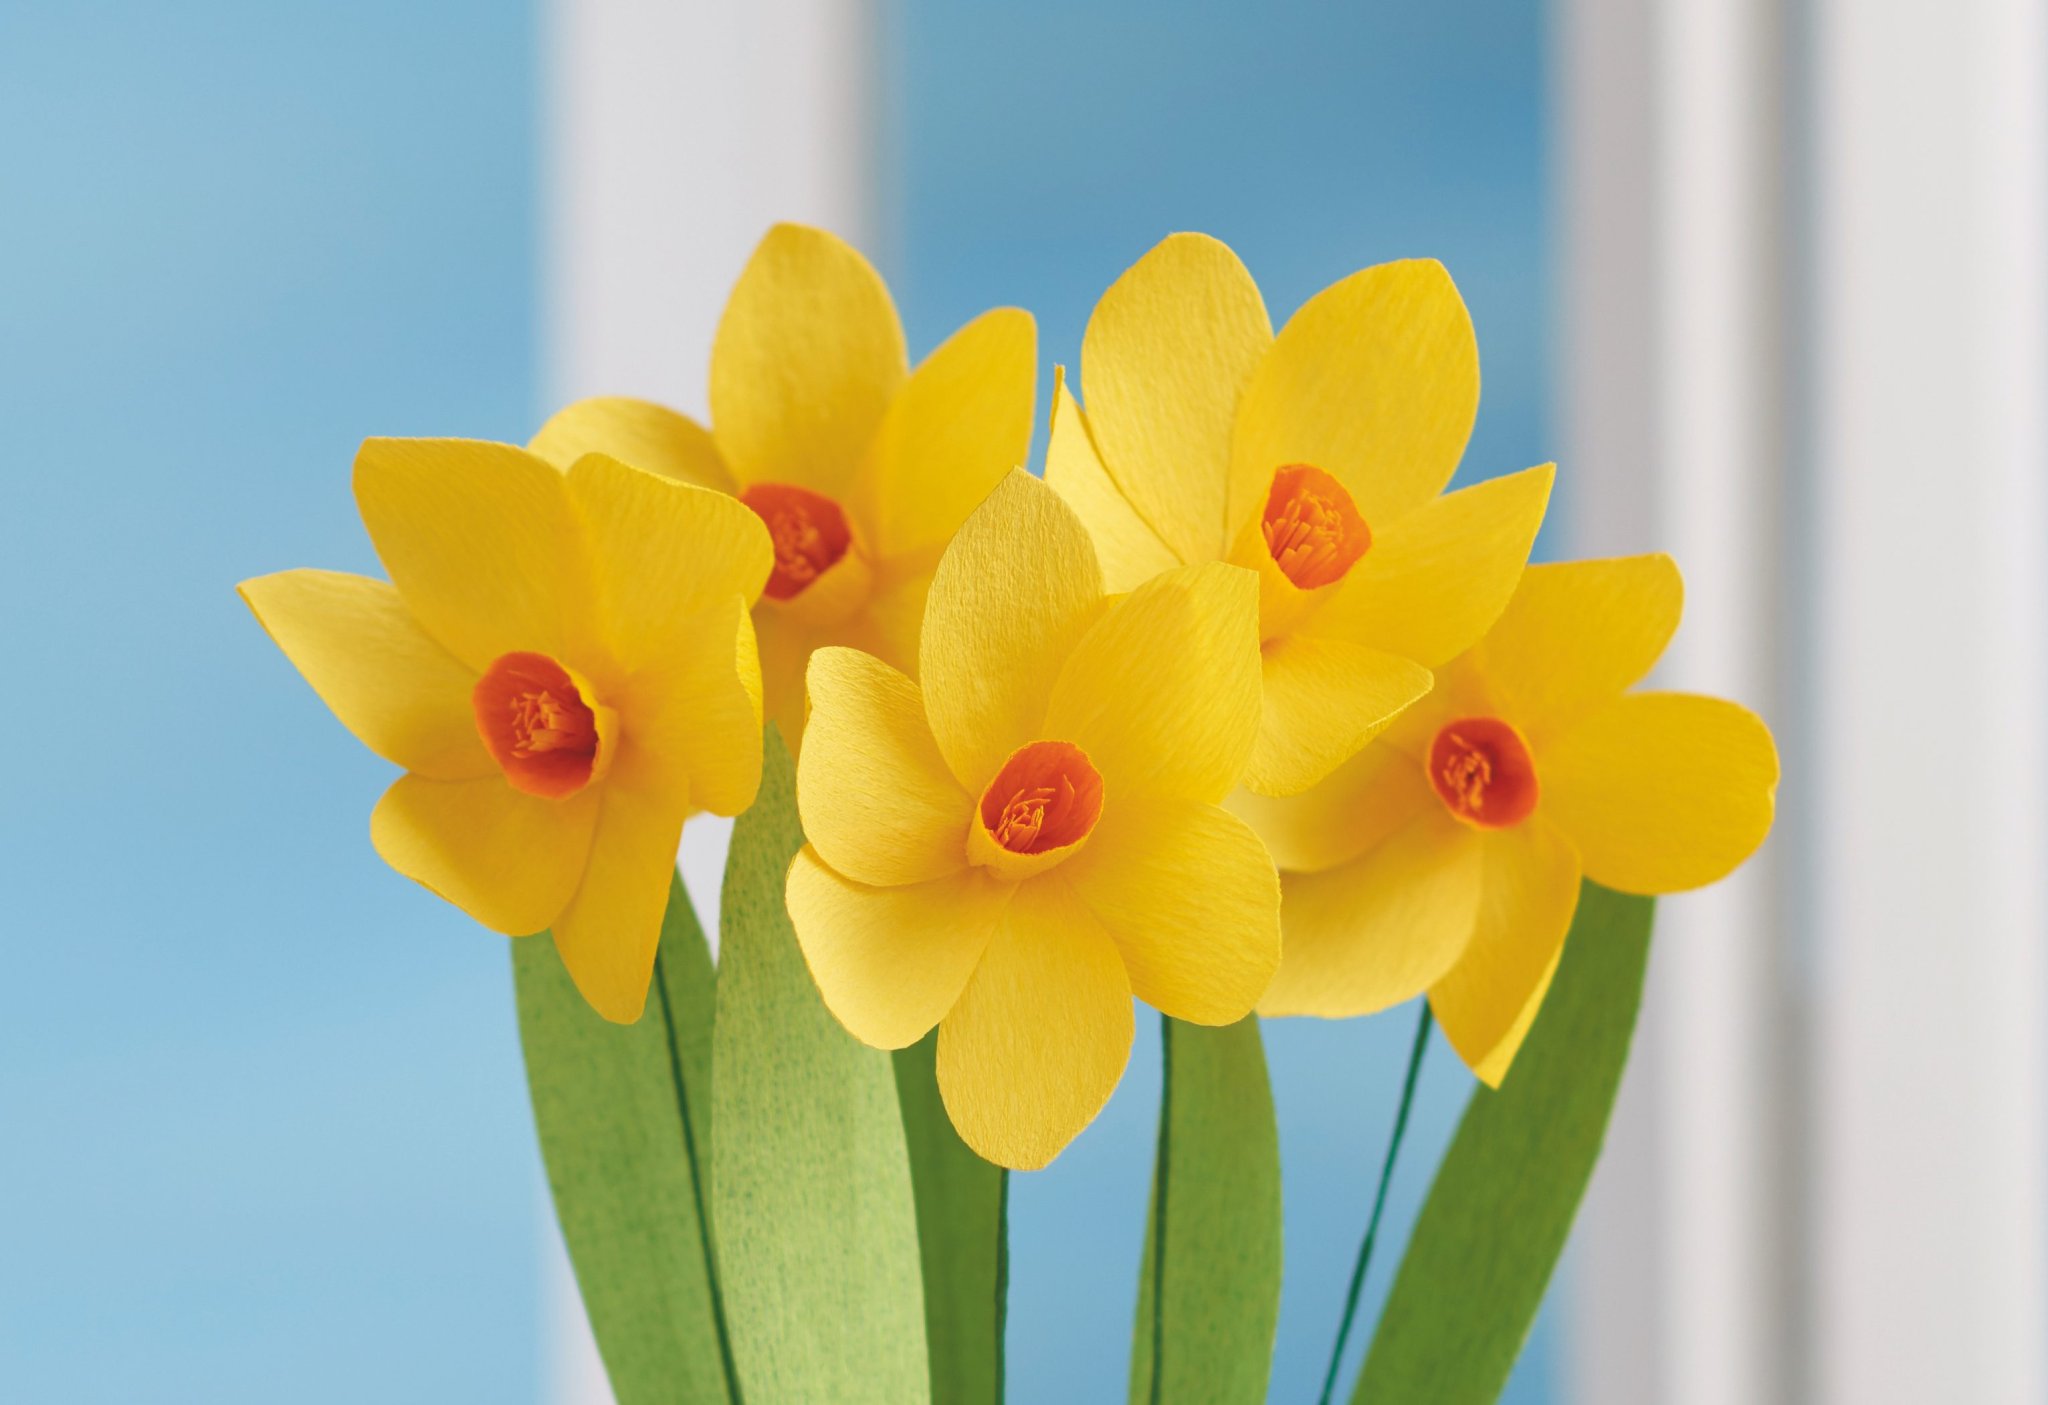 How to make paper daffodils